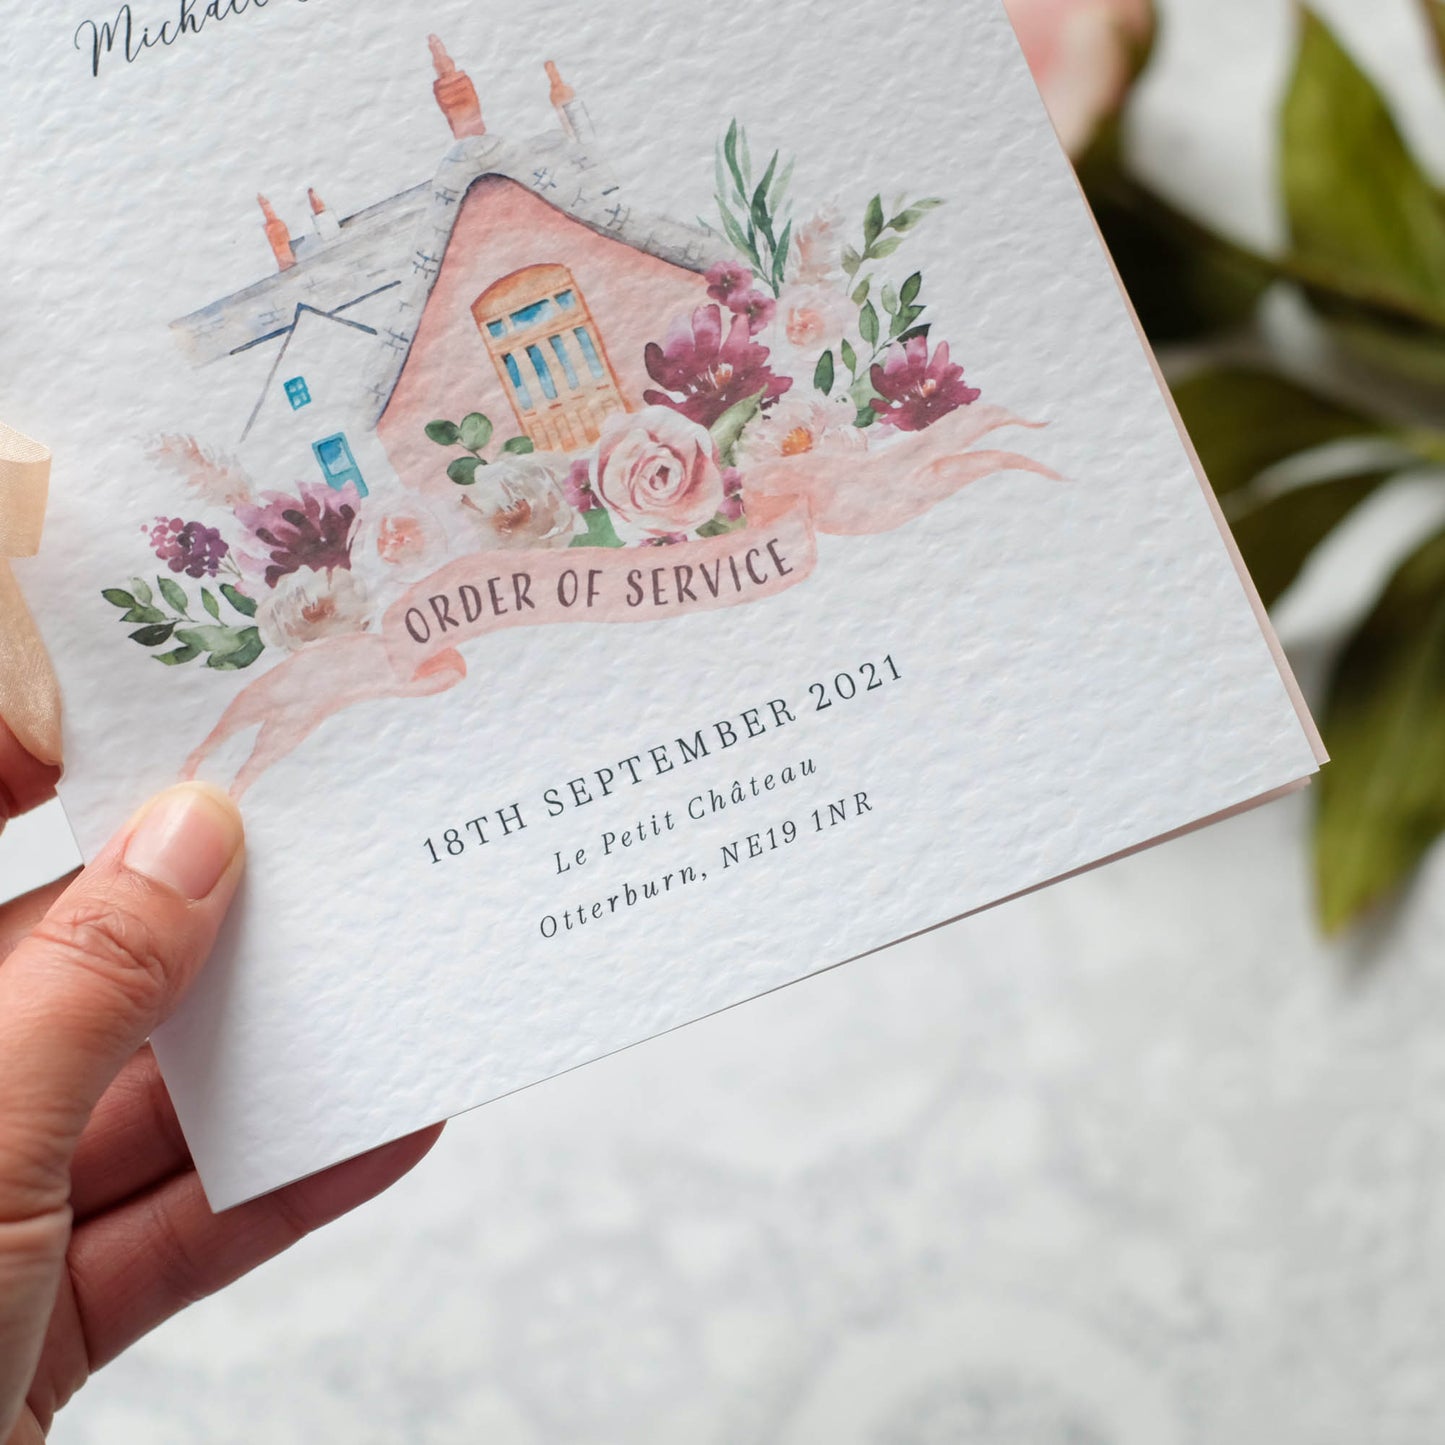 Blush Pink Order Of Service Booklet With Watercolour Illustration